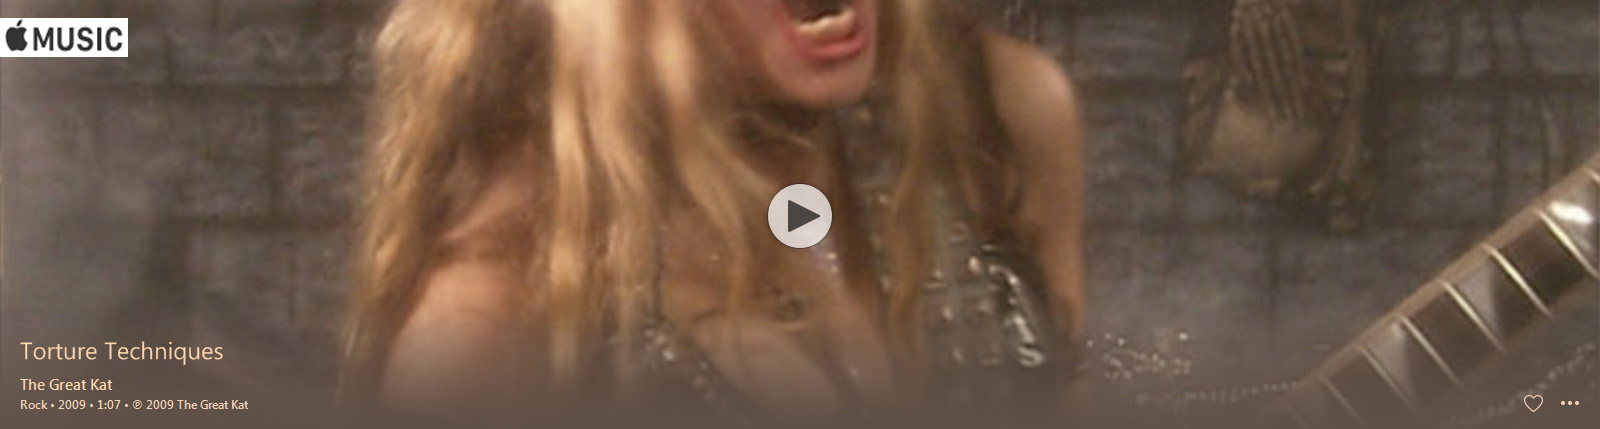 APPLE MUSIC is NOW STREAMING The Great Kat's "TORTURE TECHNIQUES" MUSIC VIDEO!